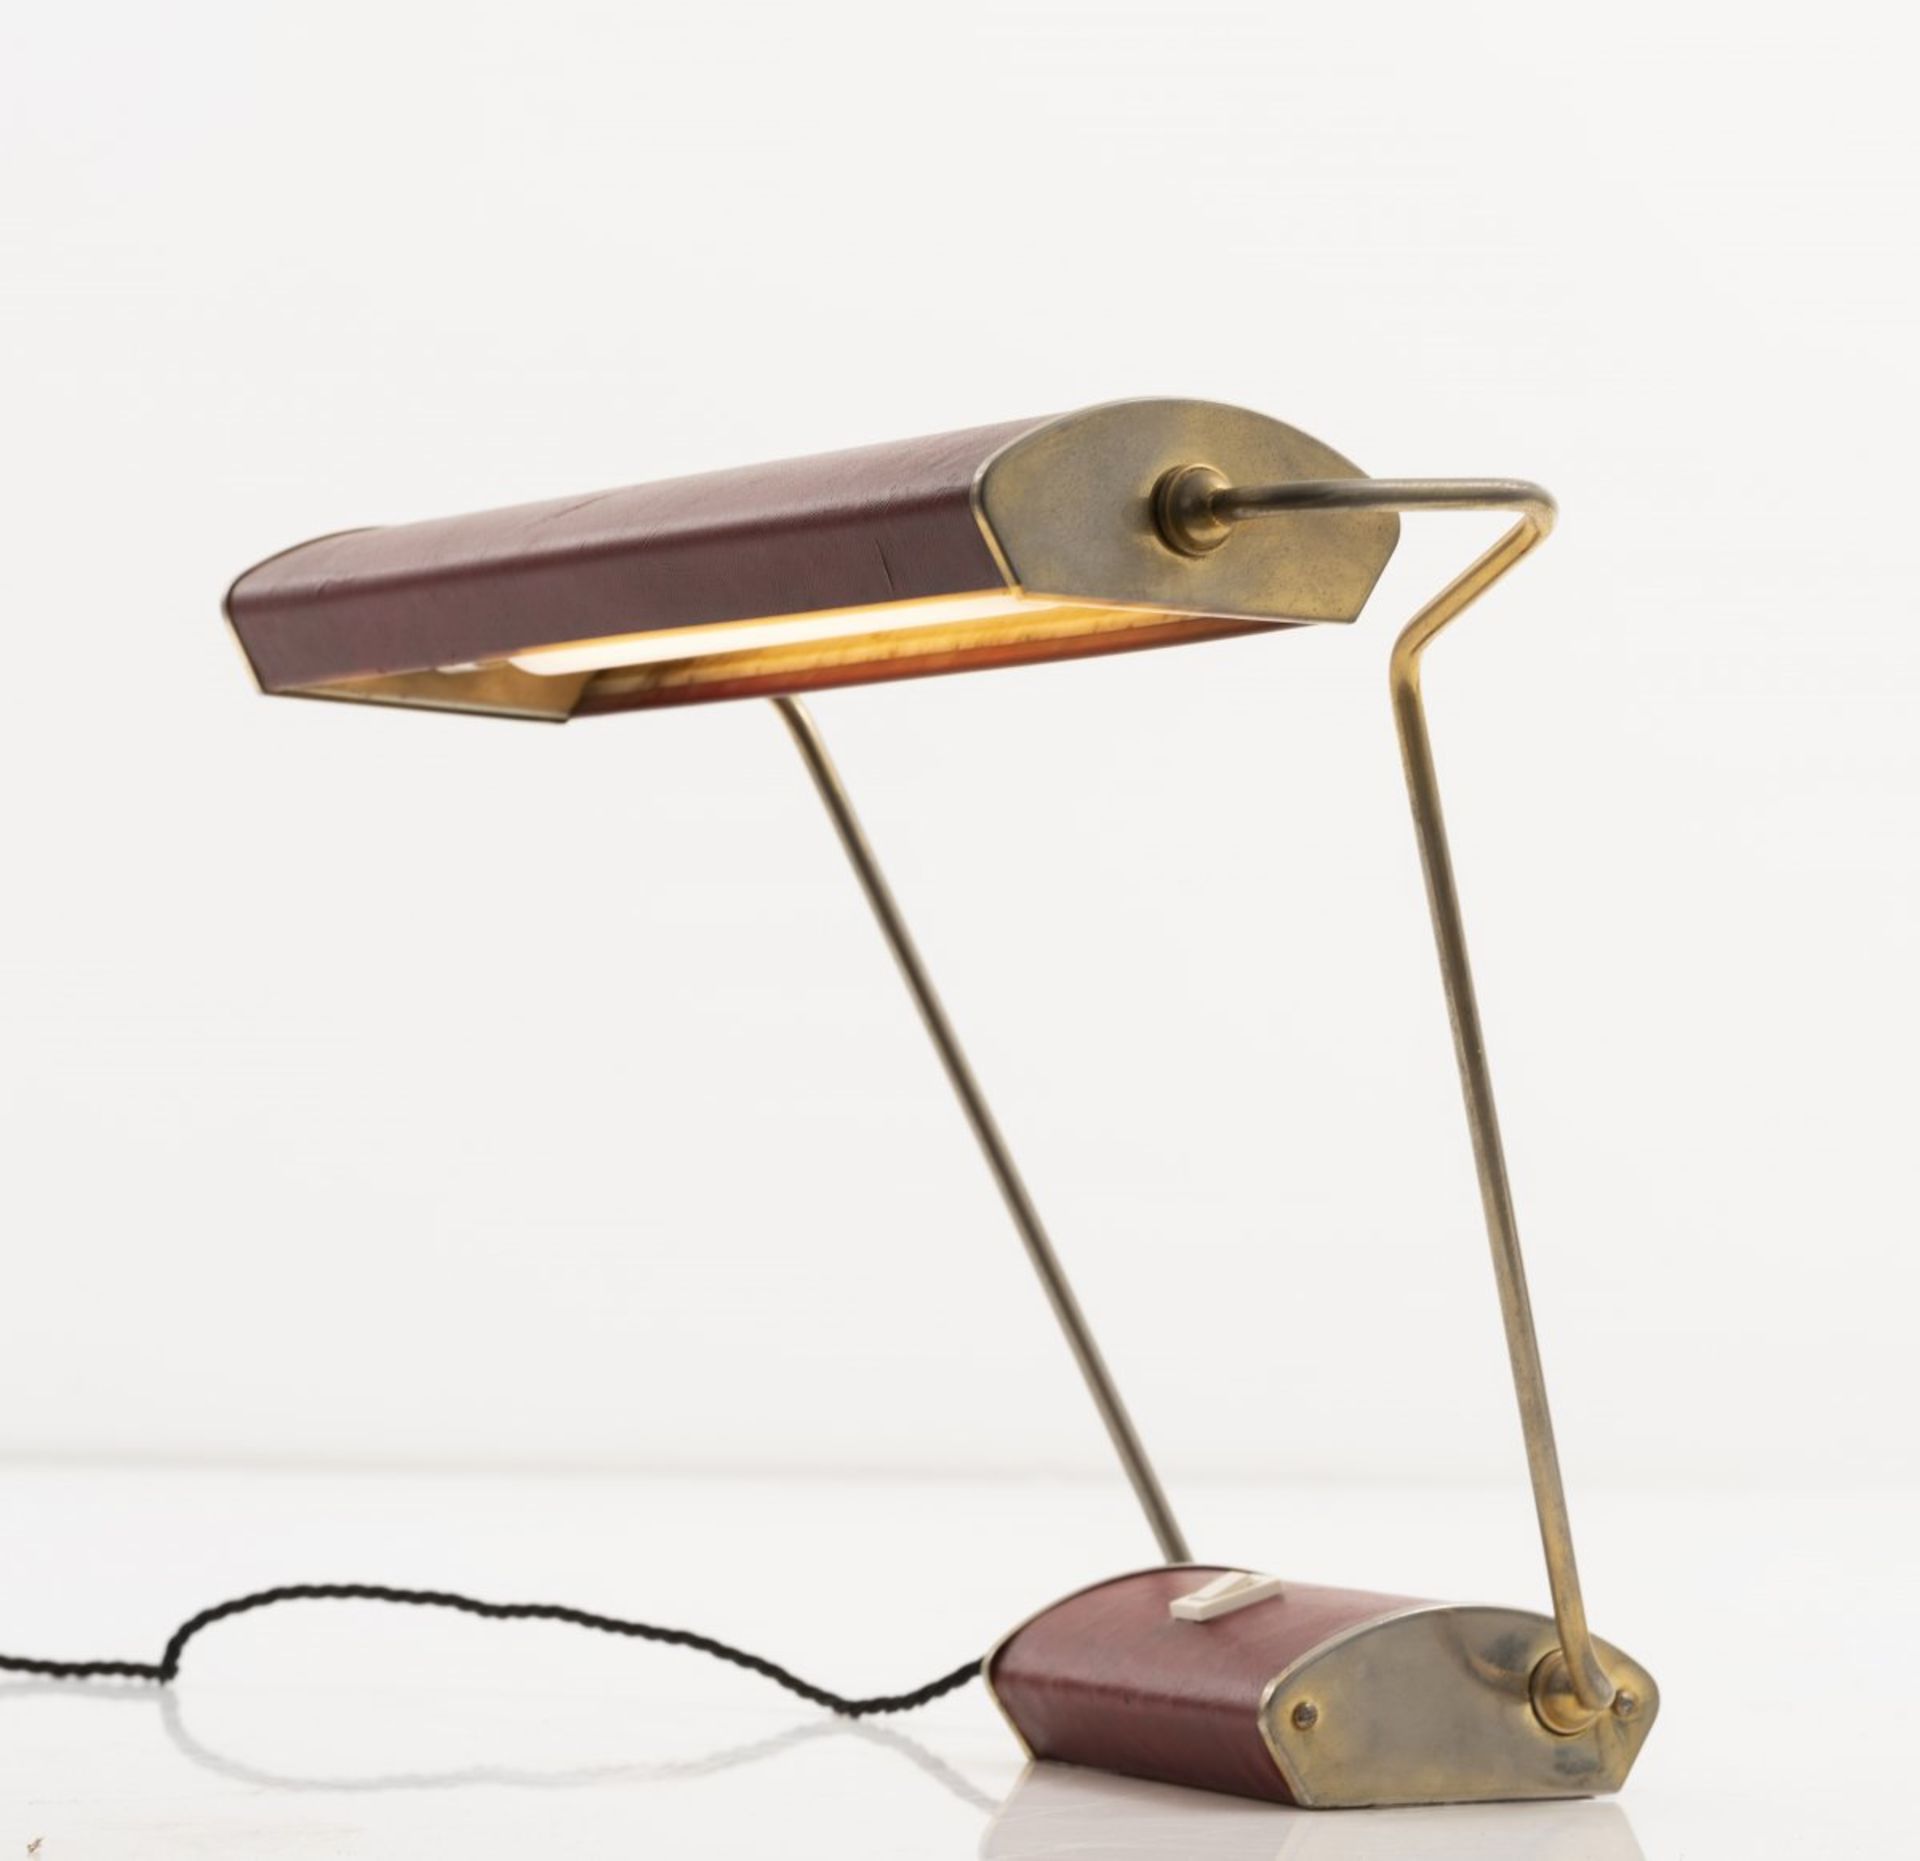 Eileen Gray (attributed), '71' table light, c. 1935